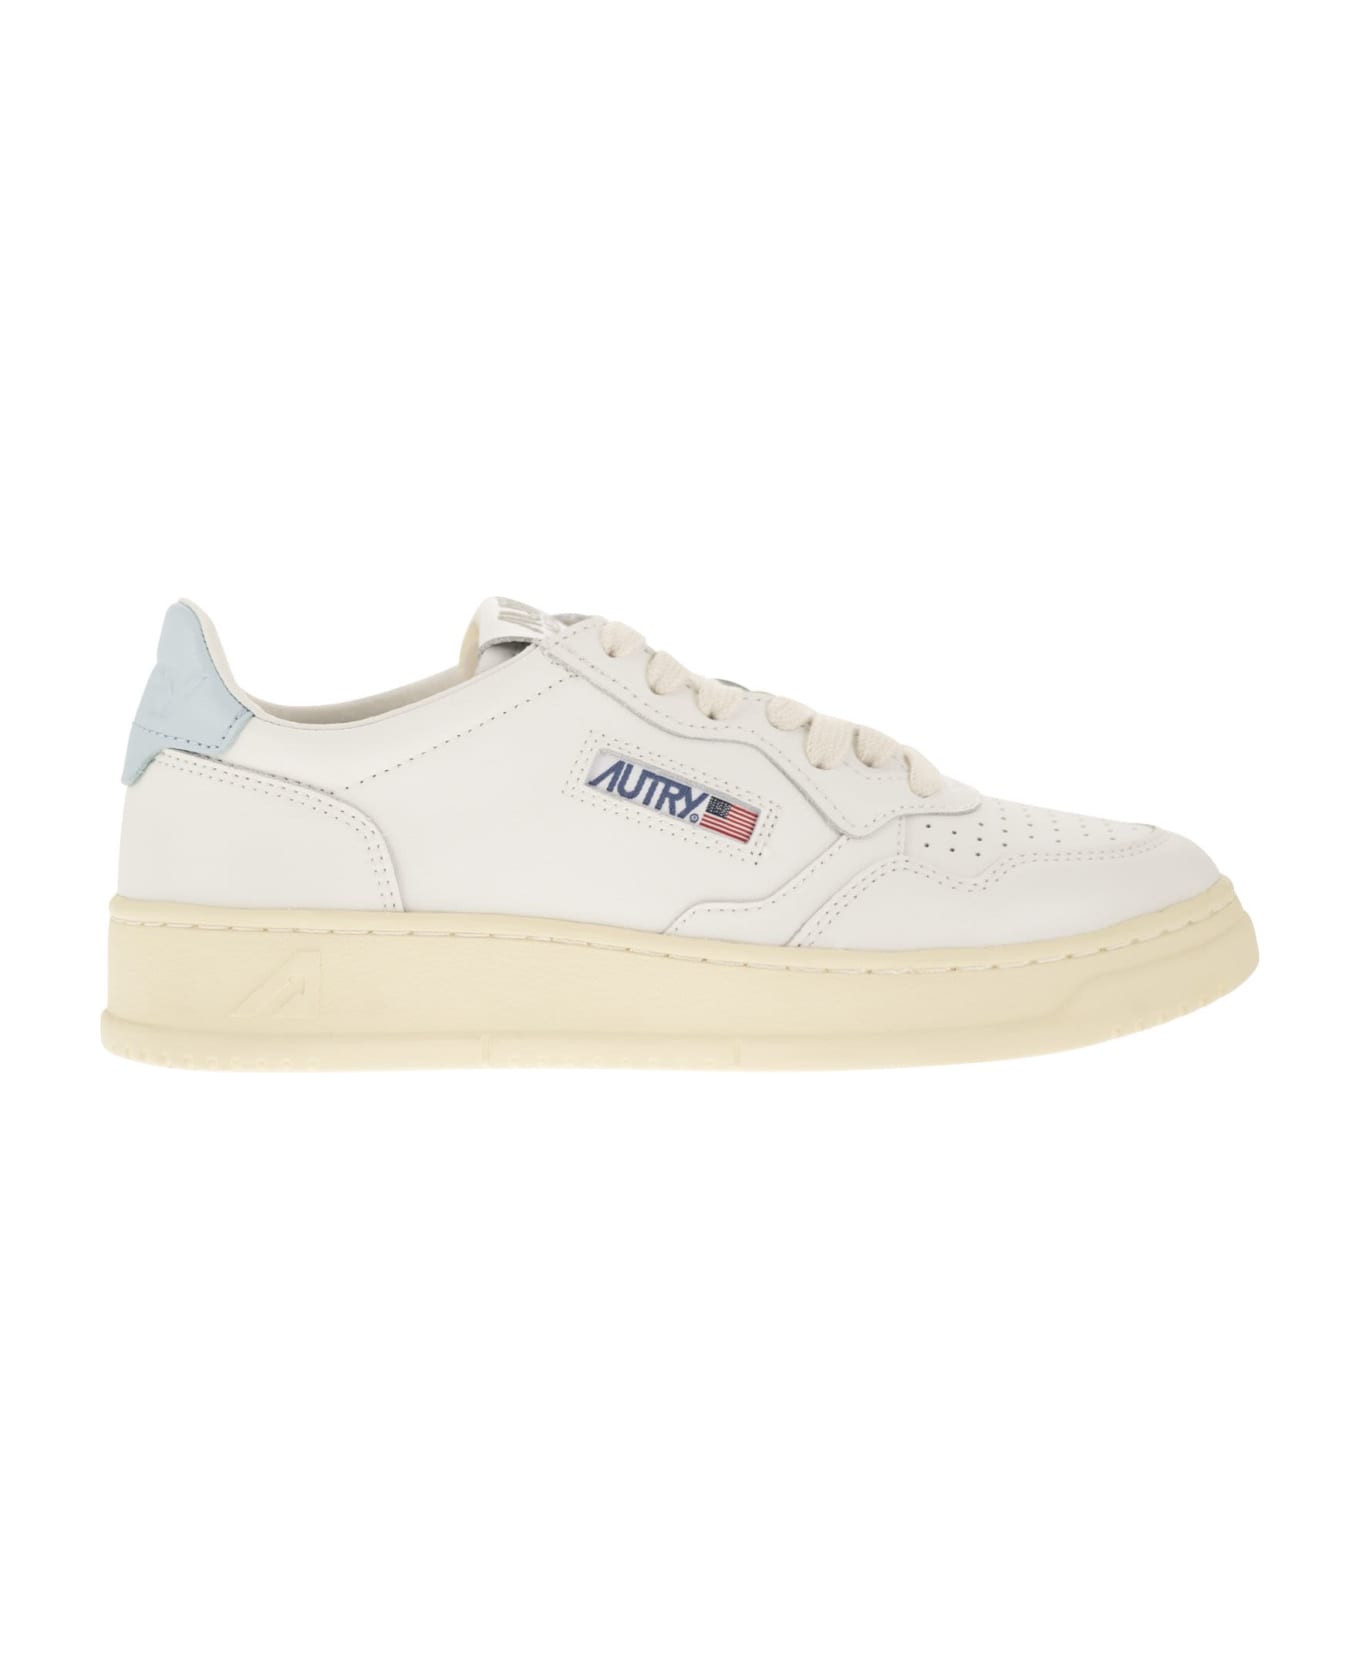 Autry Medalist Low - Leather Sneakers - Wht/str blue